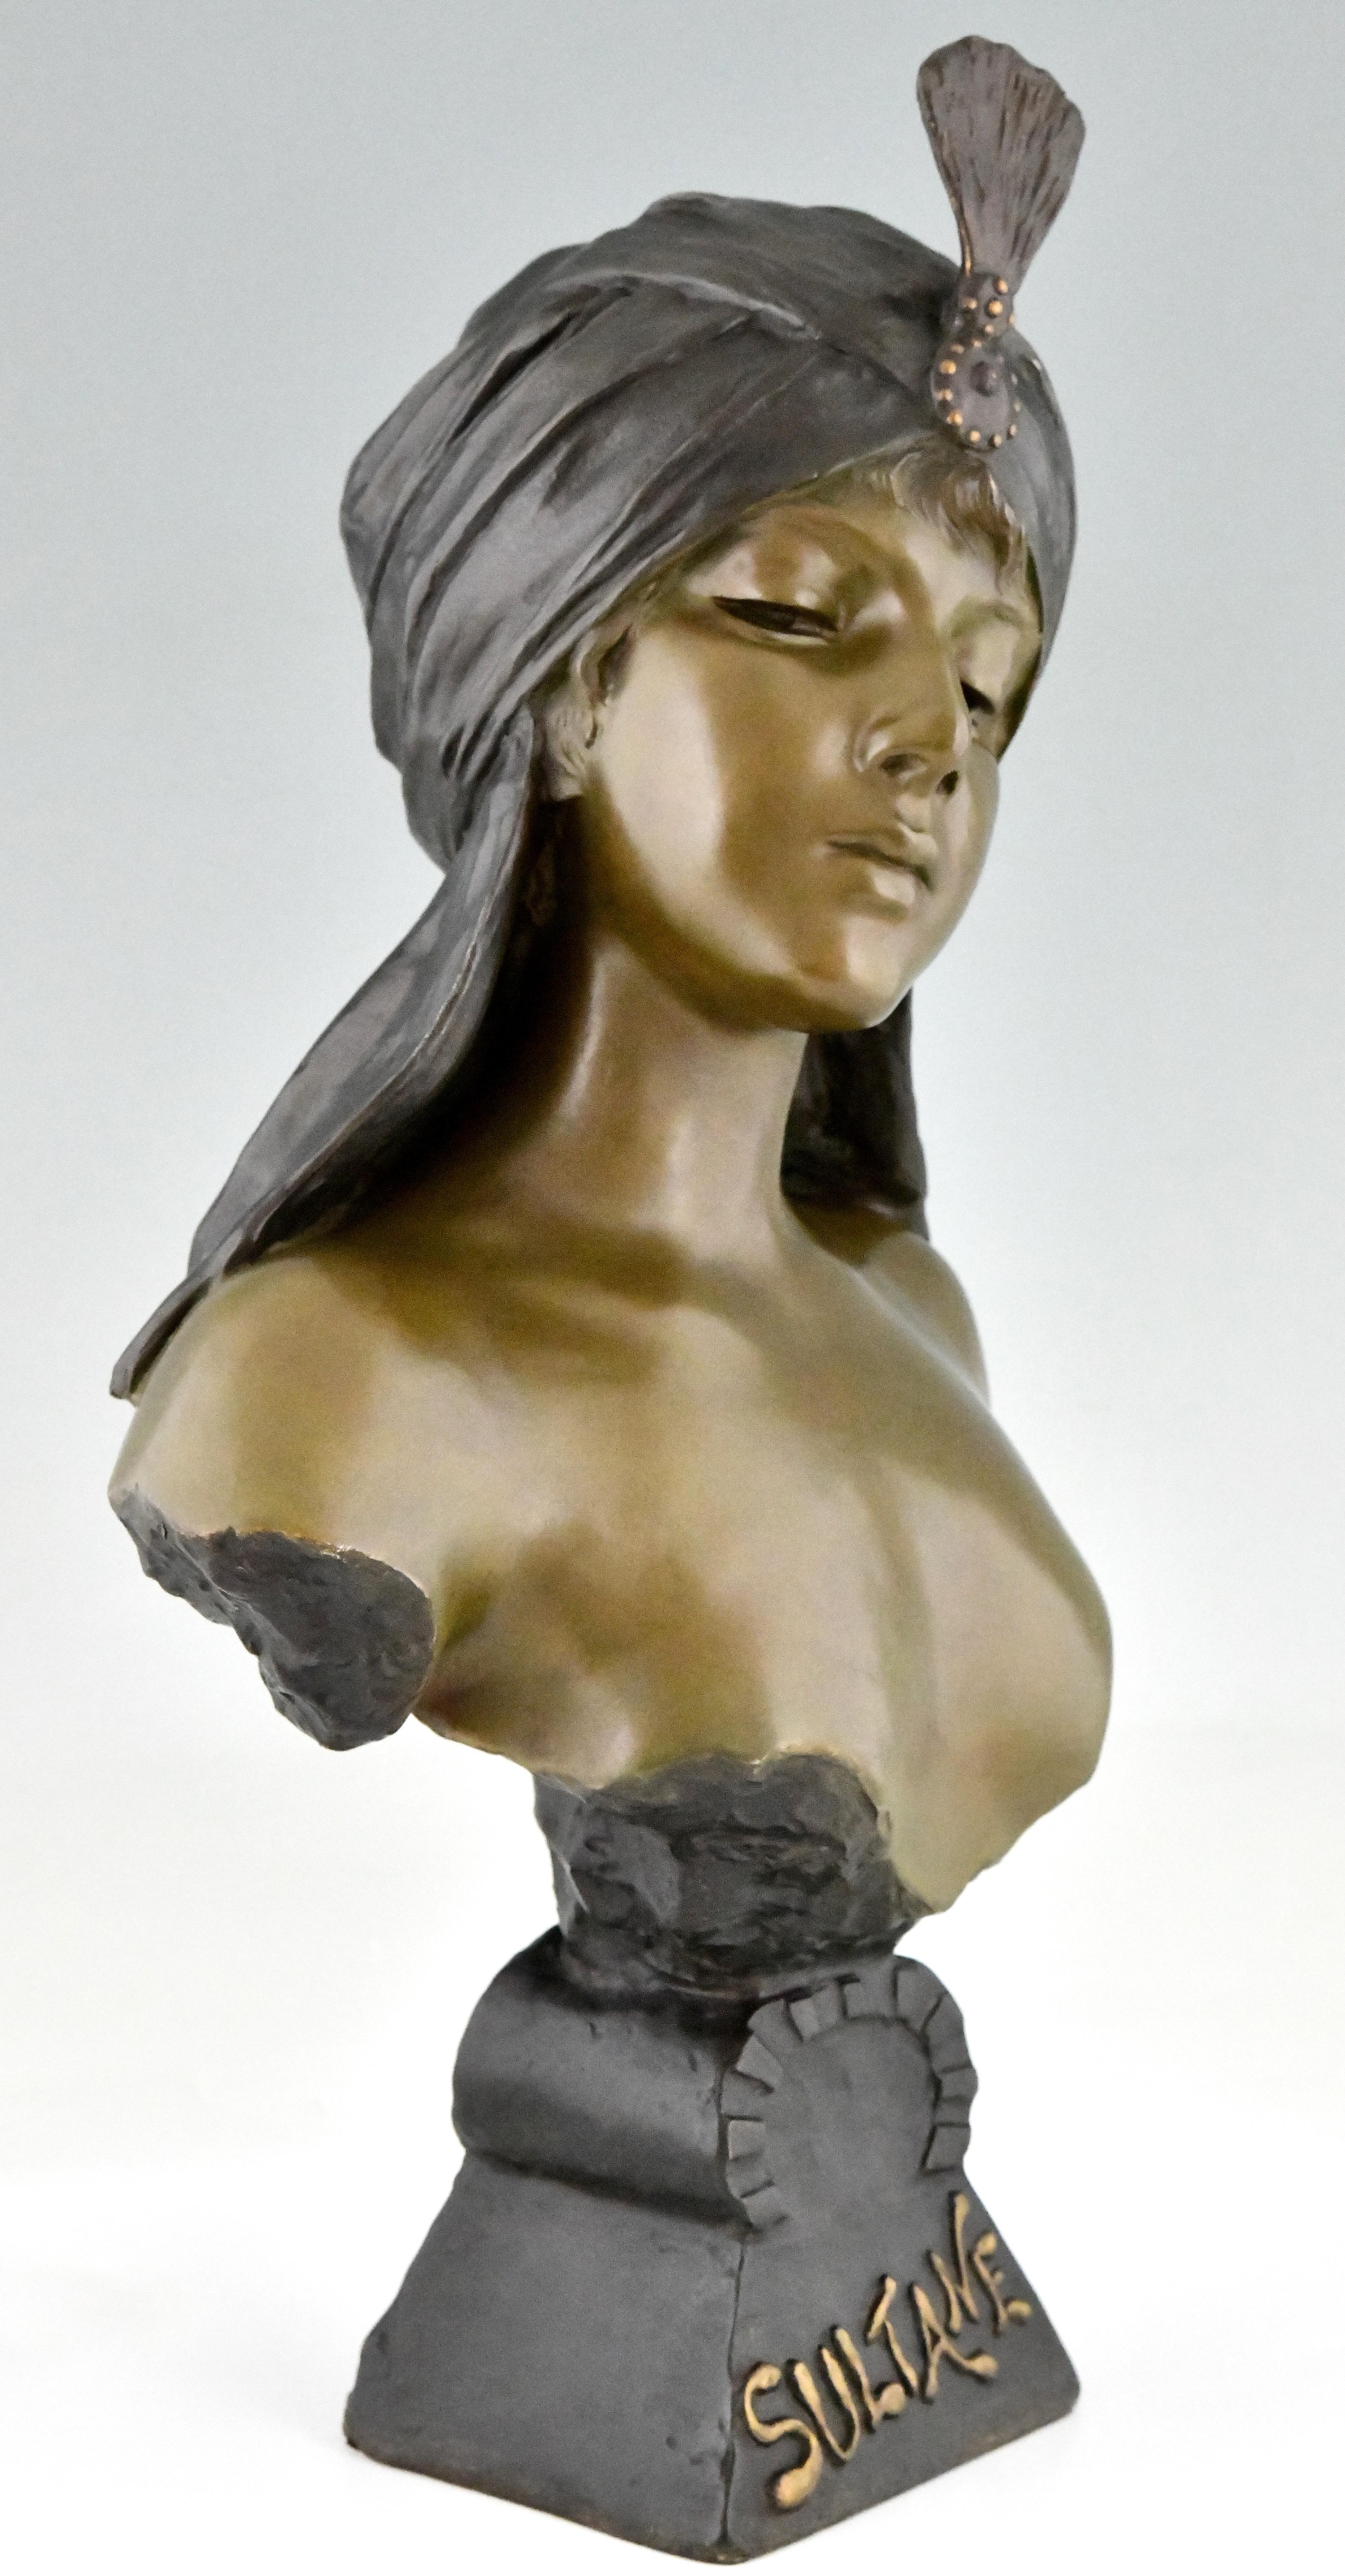 French Art Nouveau bust of a woman Sultane signed by Emmanuel Villanis 1890 For Sale